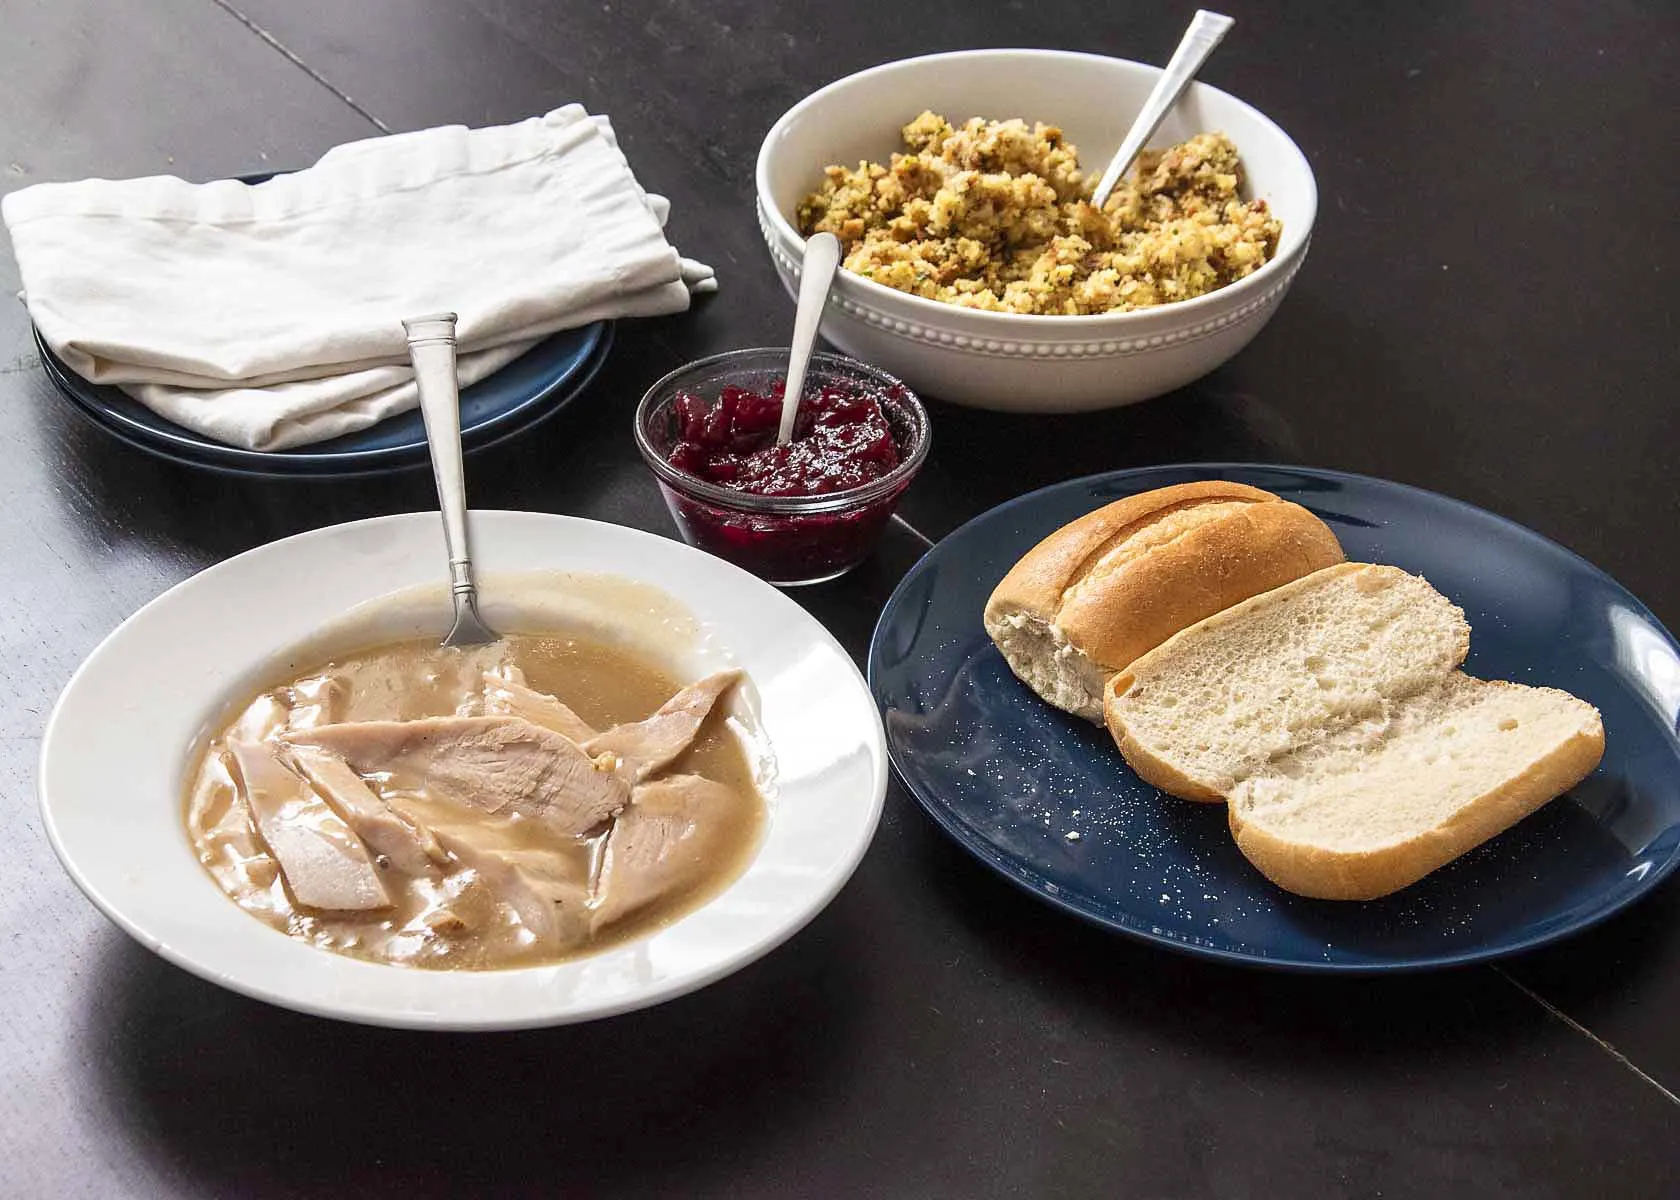 Ingredients for a Thanksgiving leftovers sandwich: turkey, gravy, cranberry sauce, stuffing and club rolls.